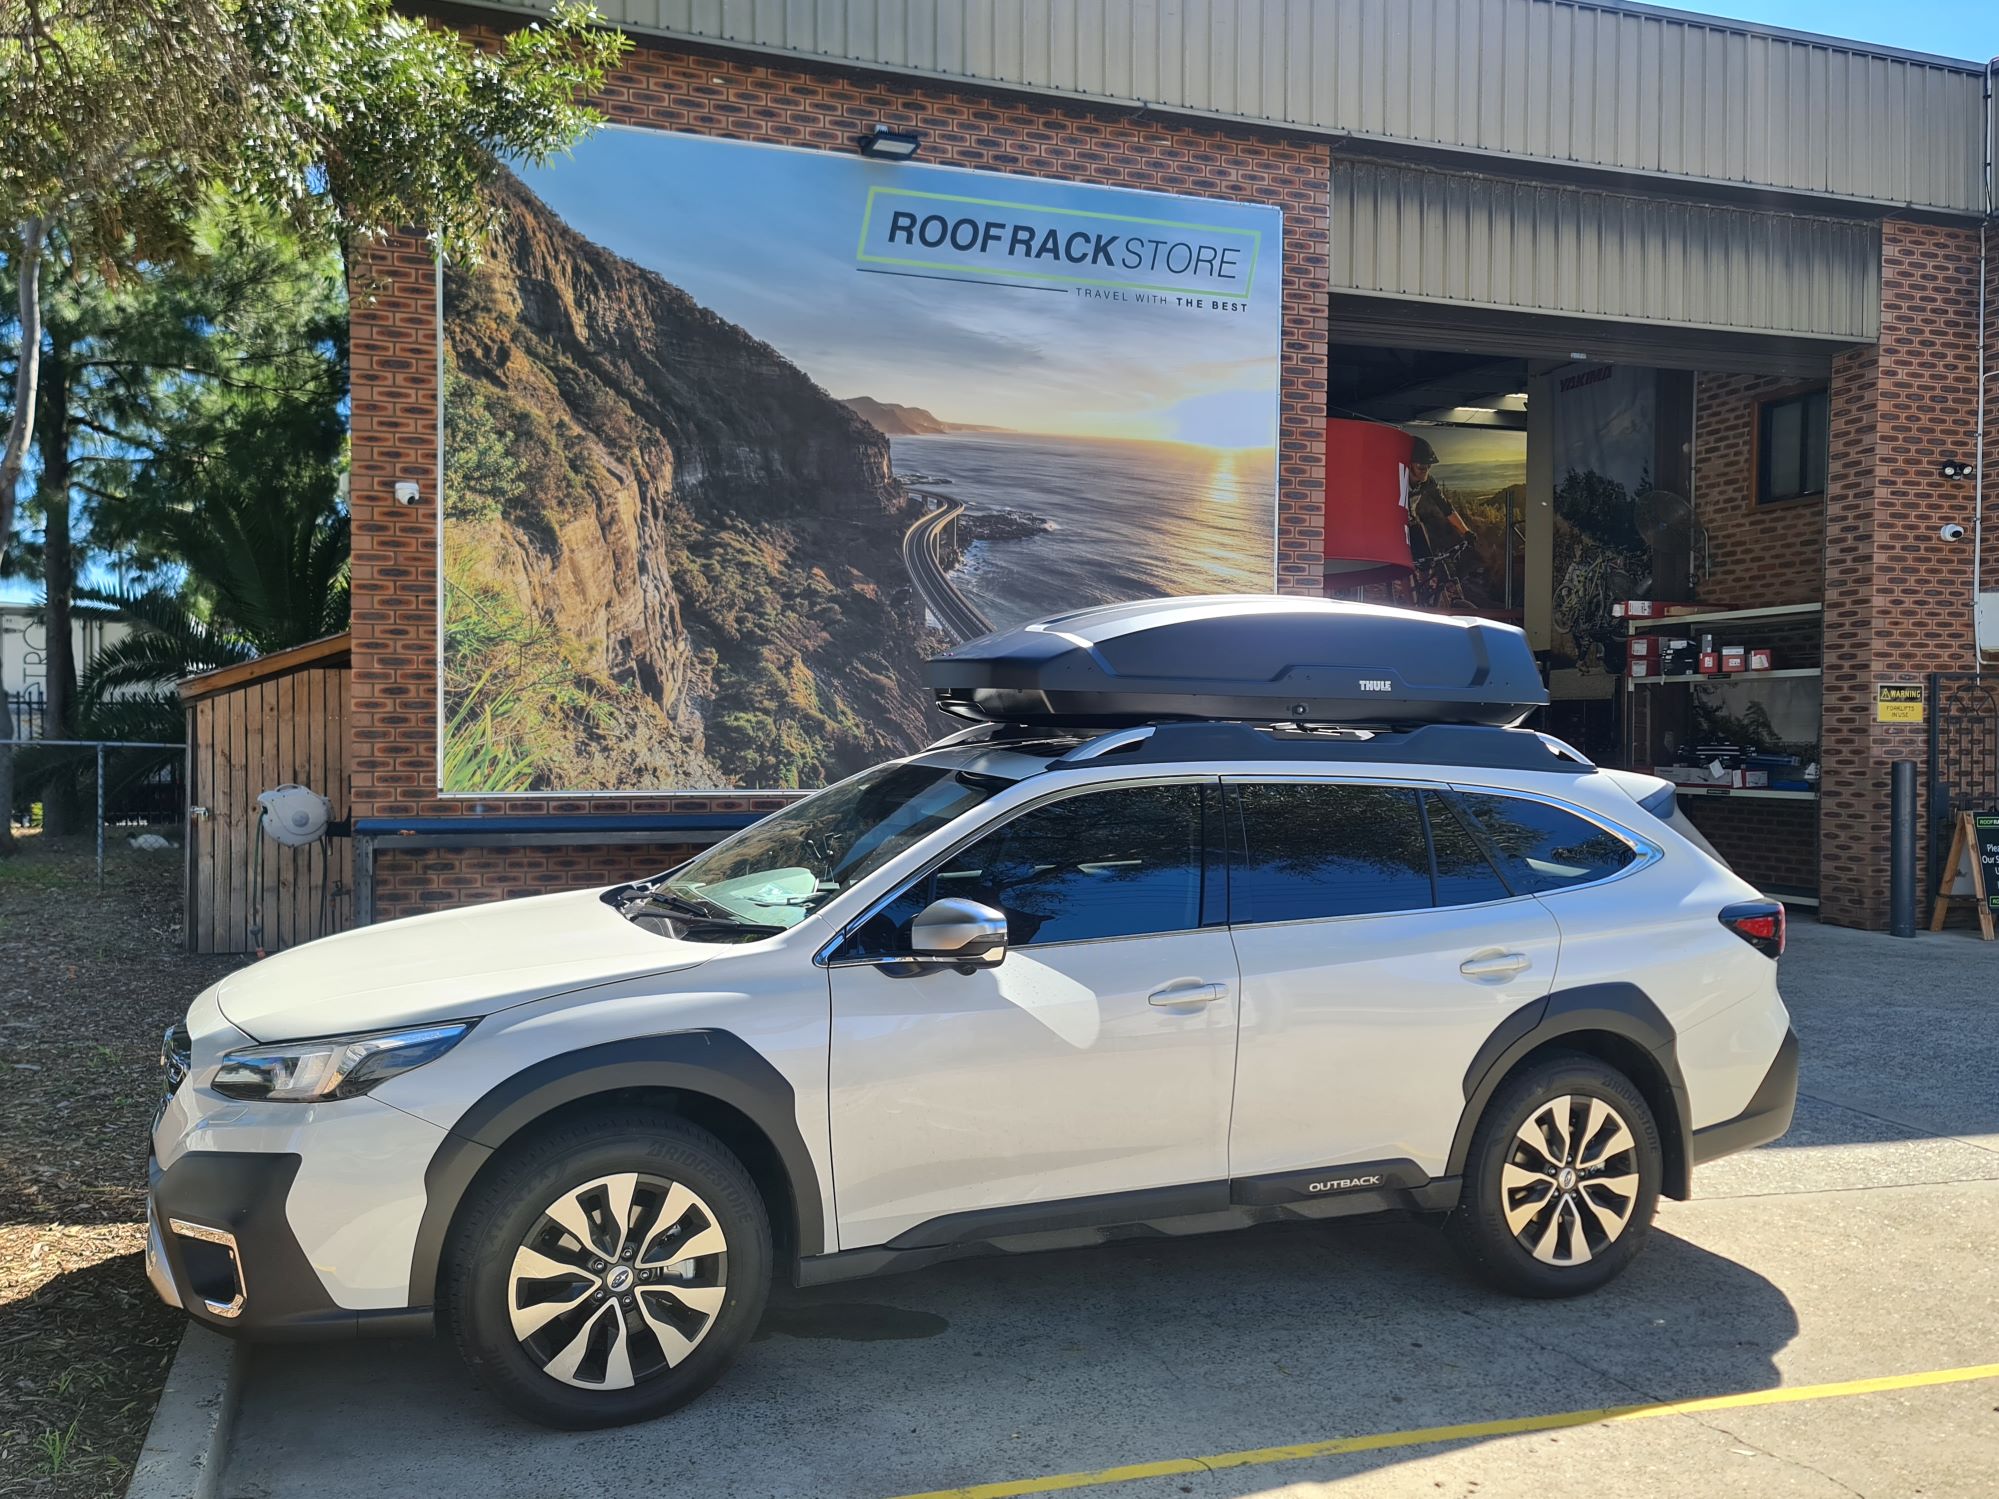 Thule Force XT XL roof box on Subaru Outback